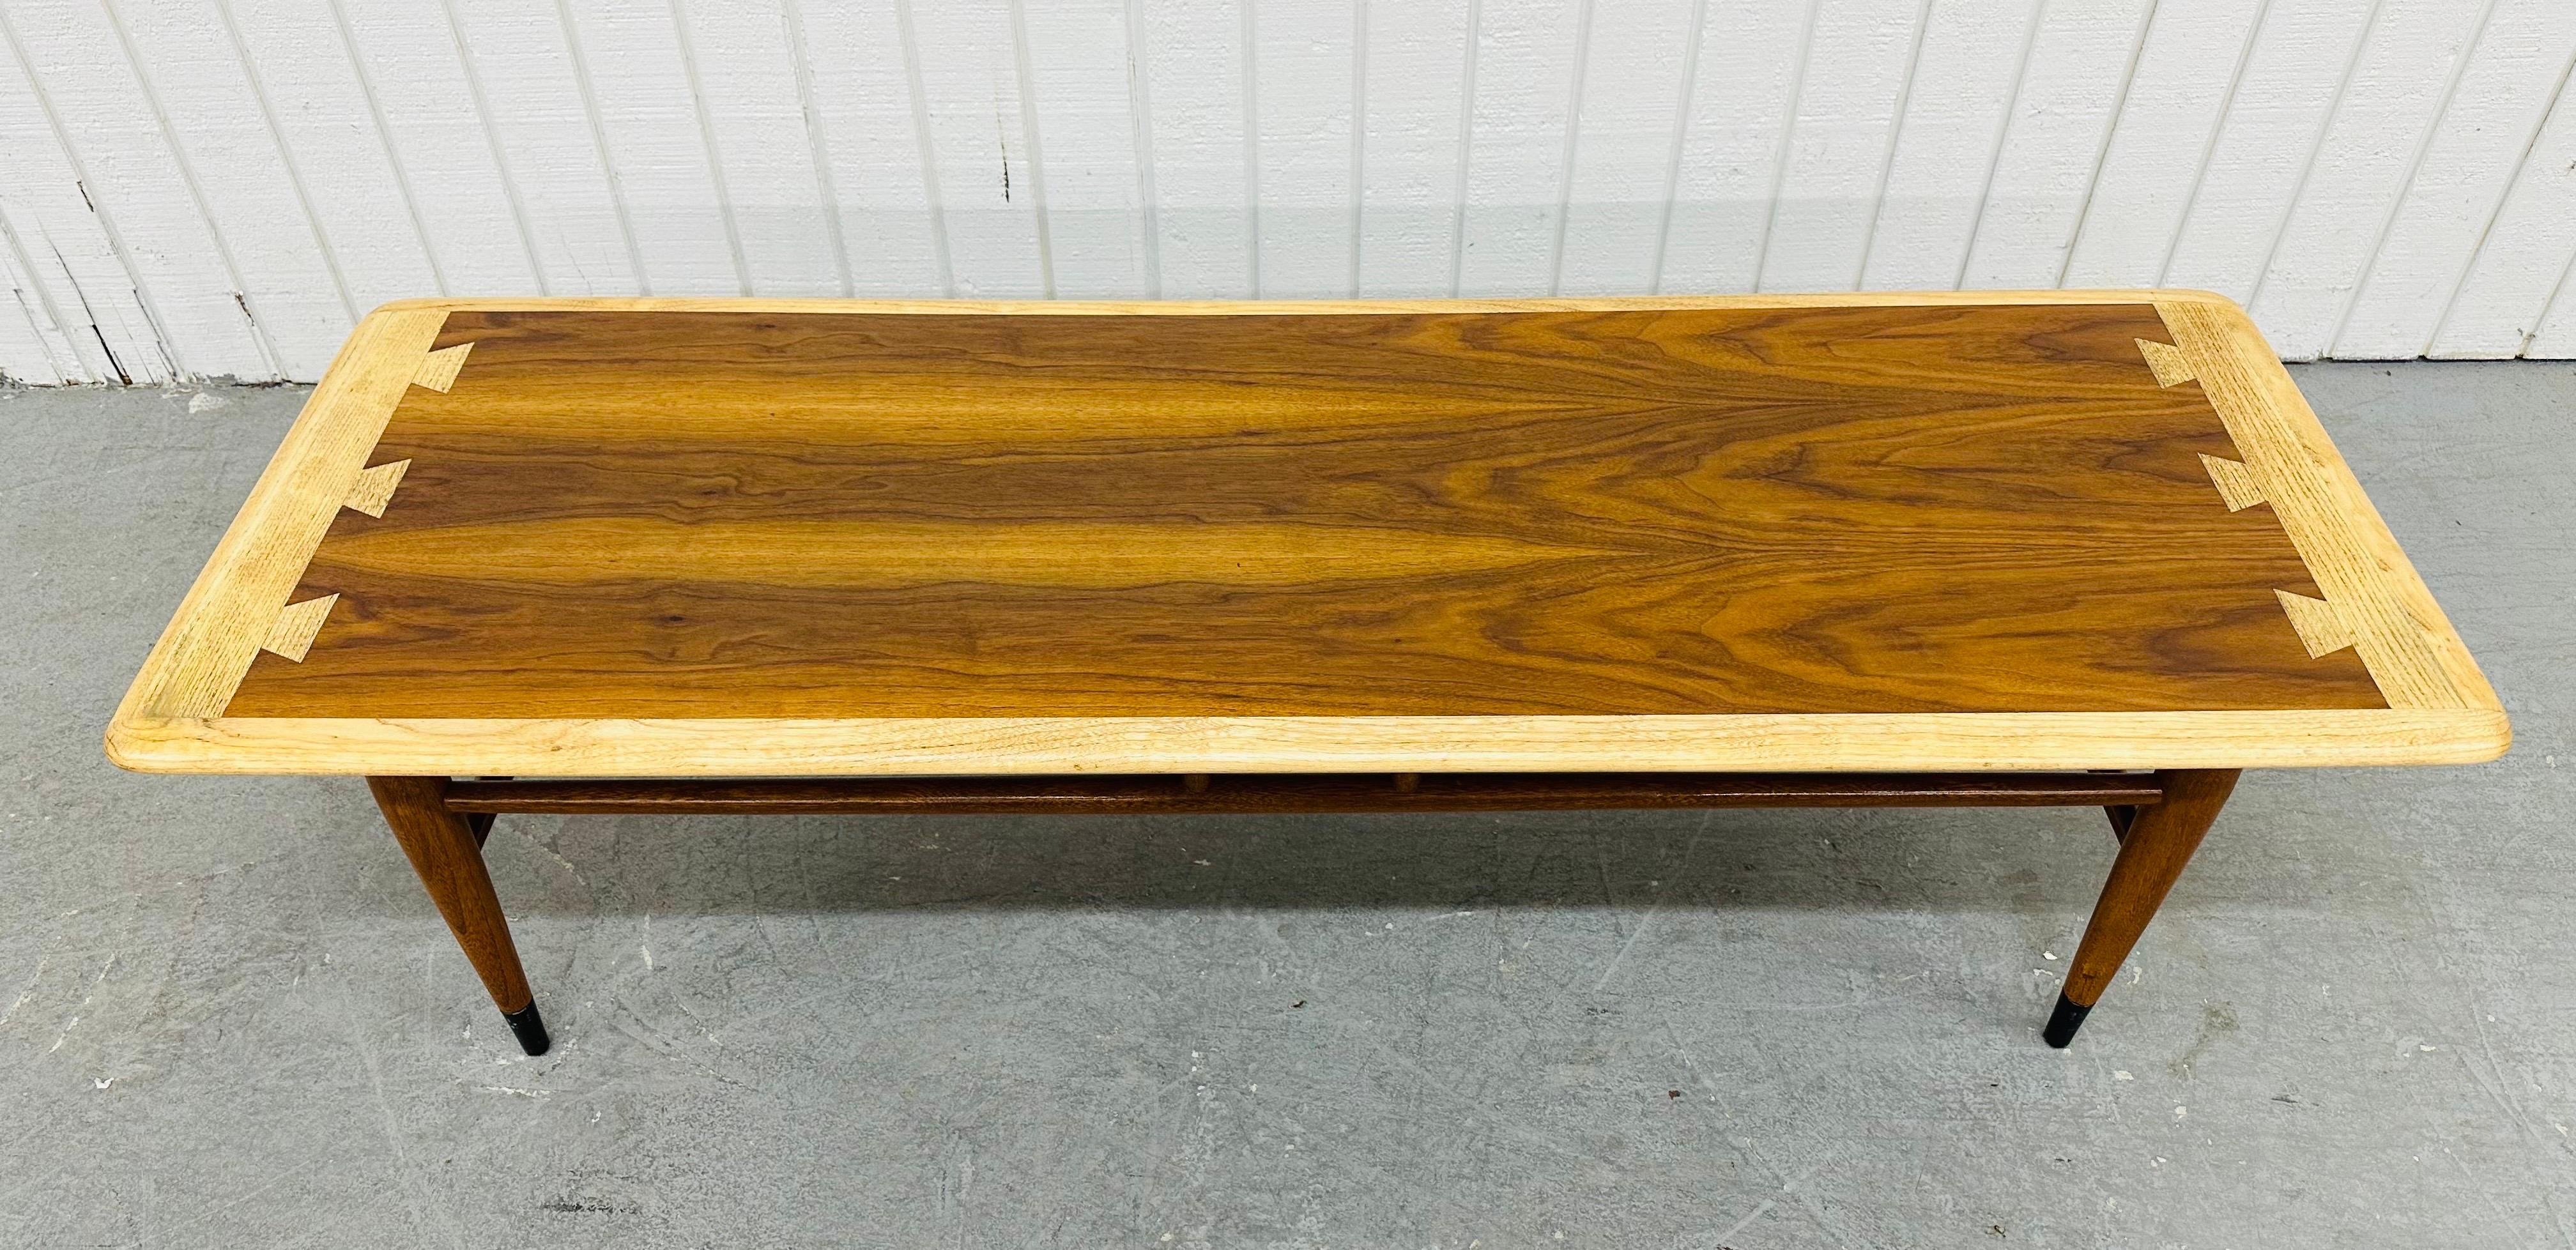 This listing is for a Mid-Century Modern Lane Acclaim Walnut Coffee Table. Featuring a rectangular dovetailed top, modern legs with stretchers, black tips on the legs, and a beautiful two-tone walnut finish. This is an exceptional combination of